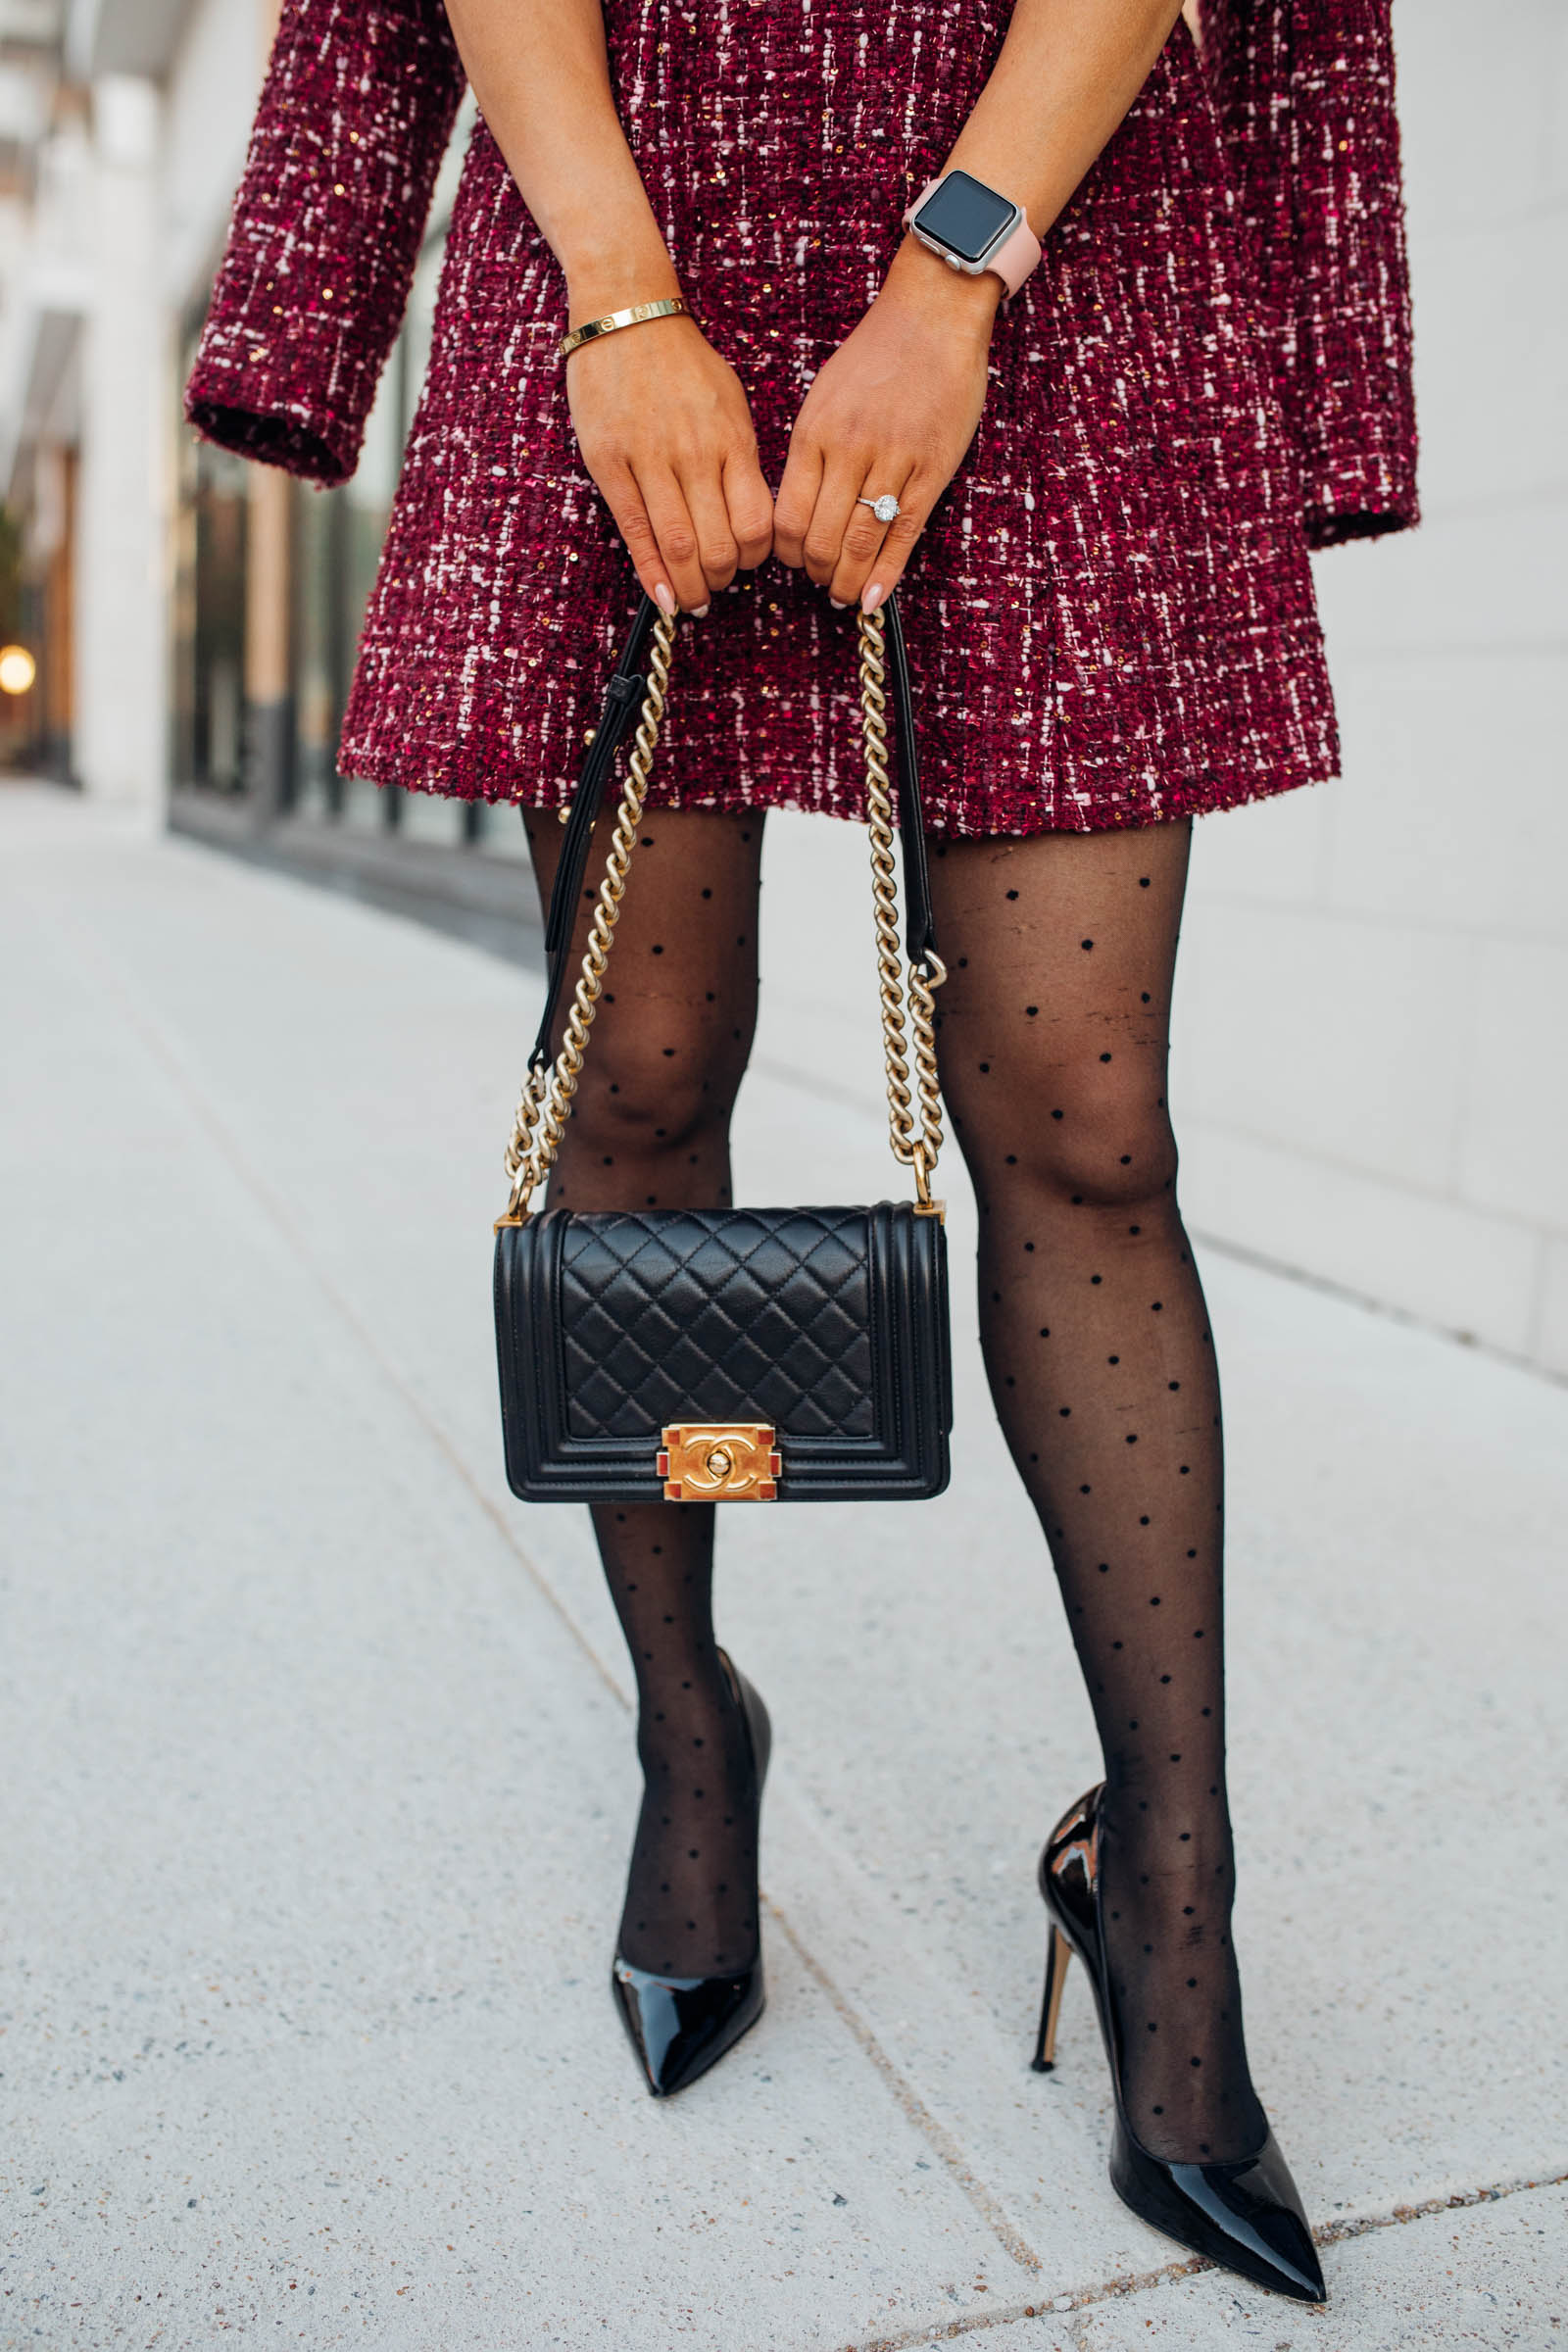 Blogger Hoang-Kim wears a Gal Meets Glam Nell Dress